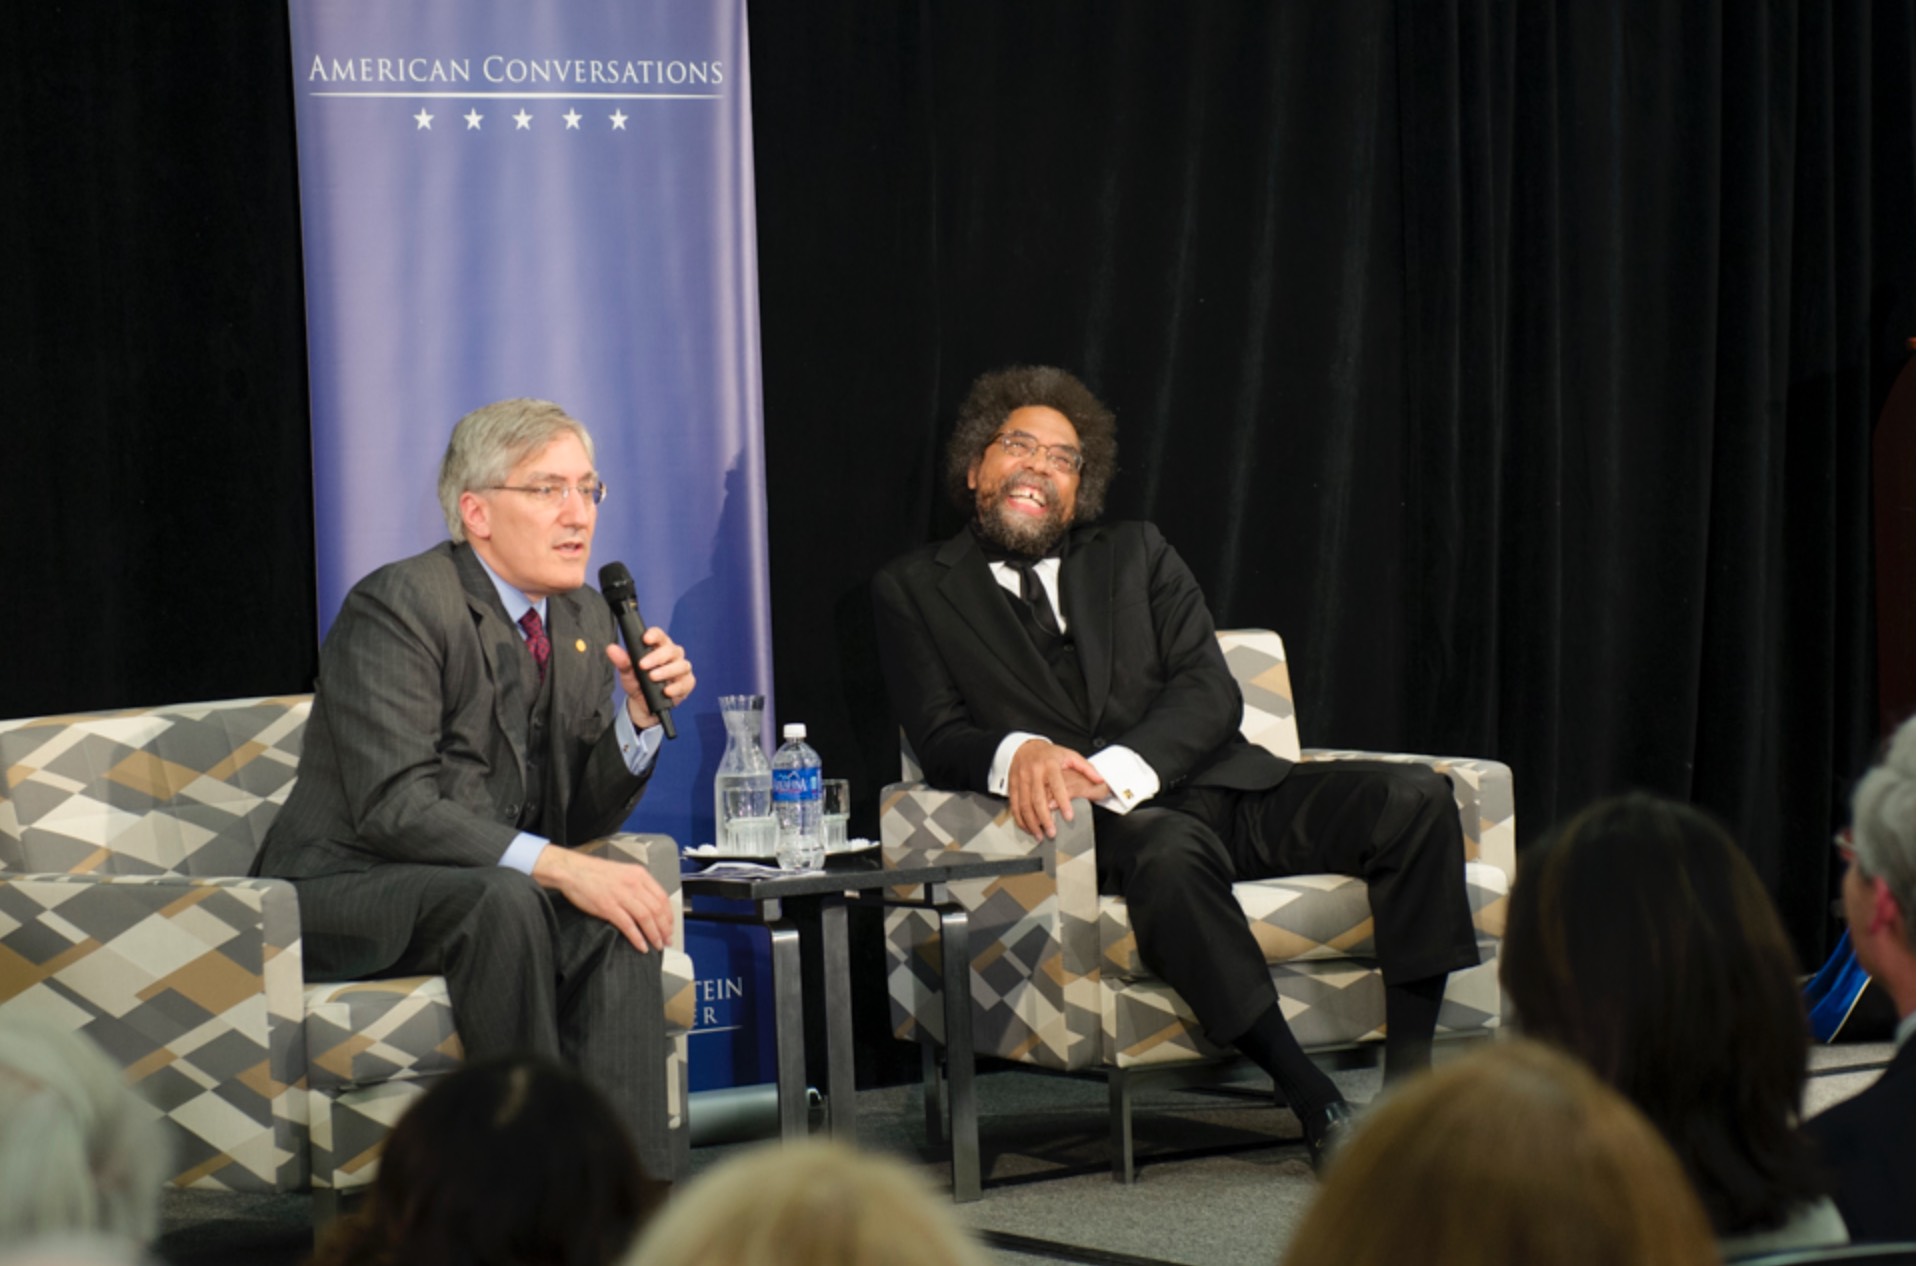 Cornel West and Robert George on stage